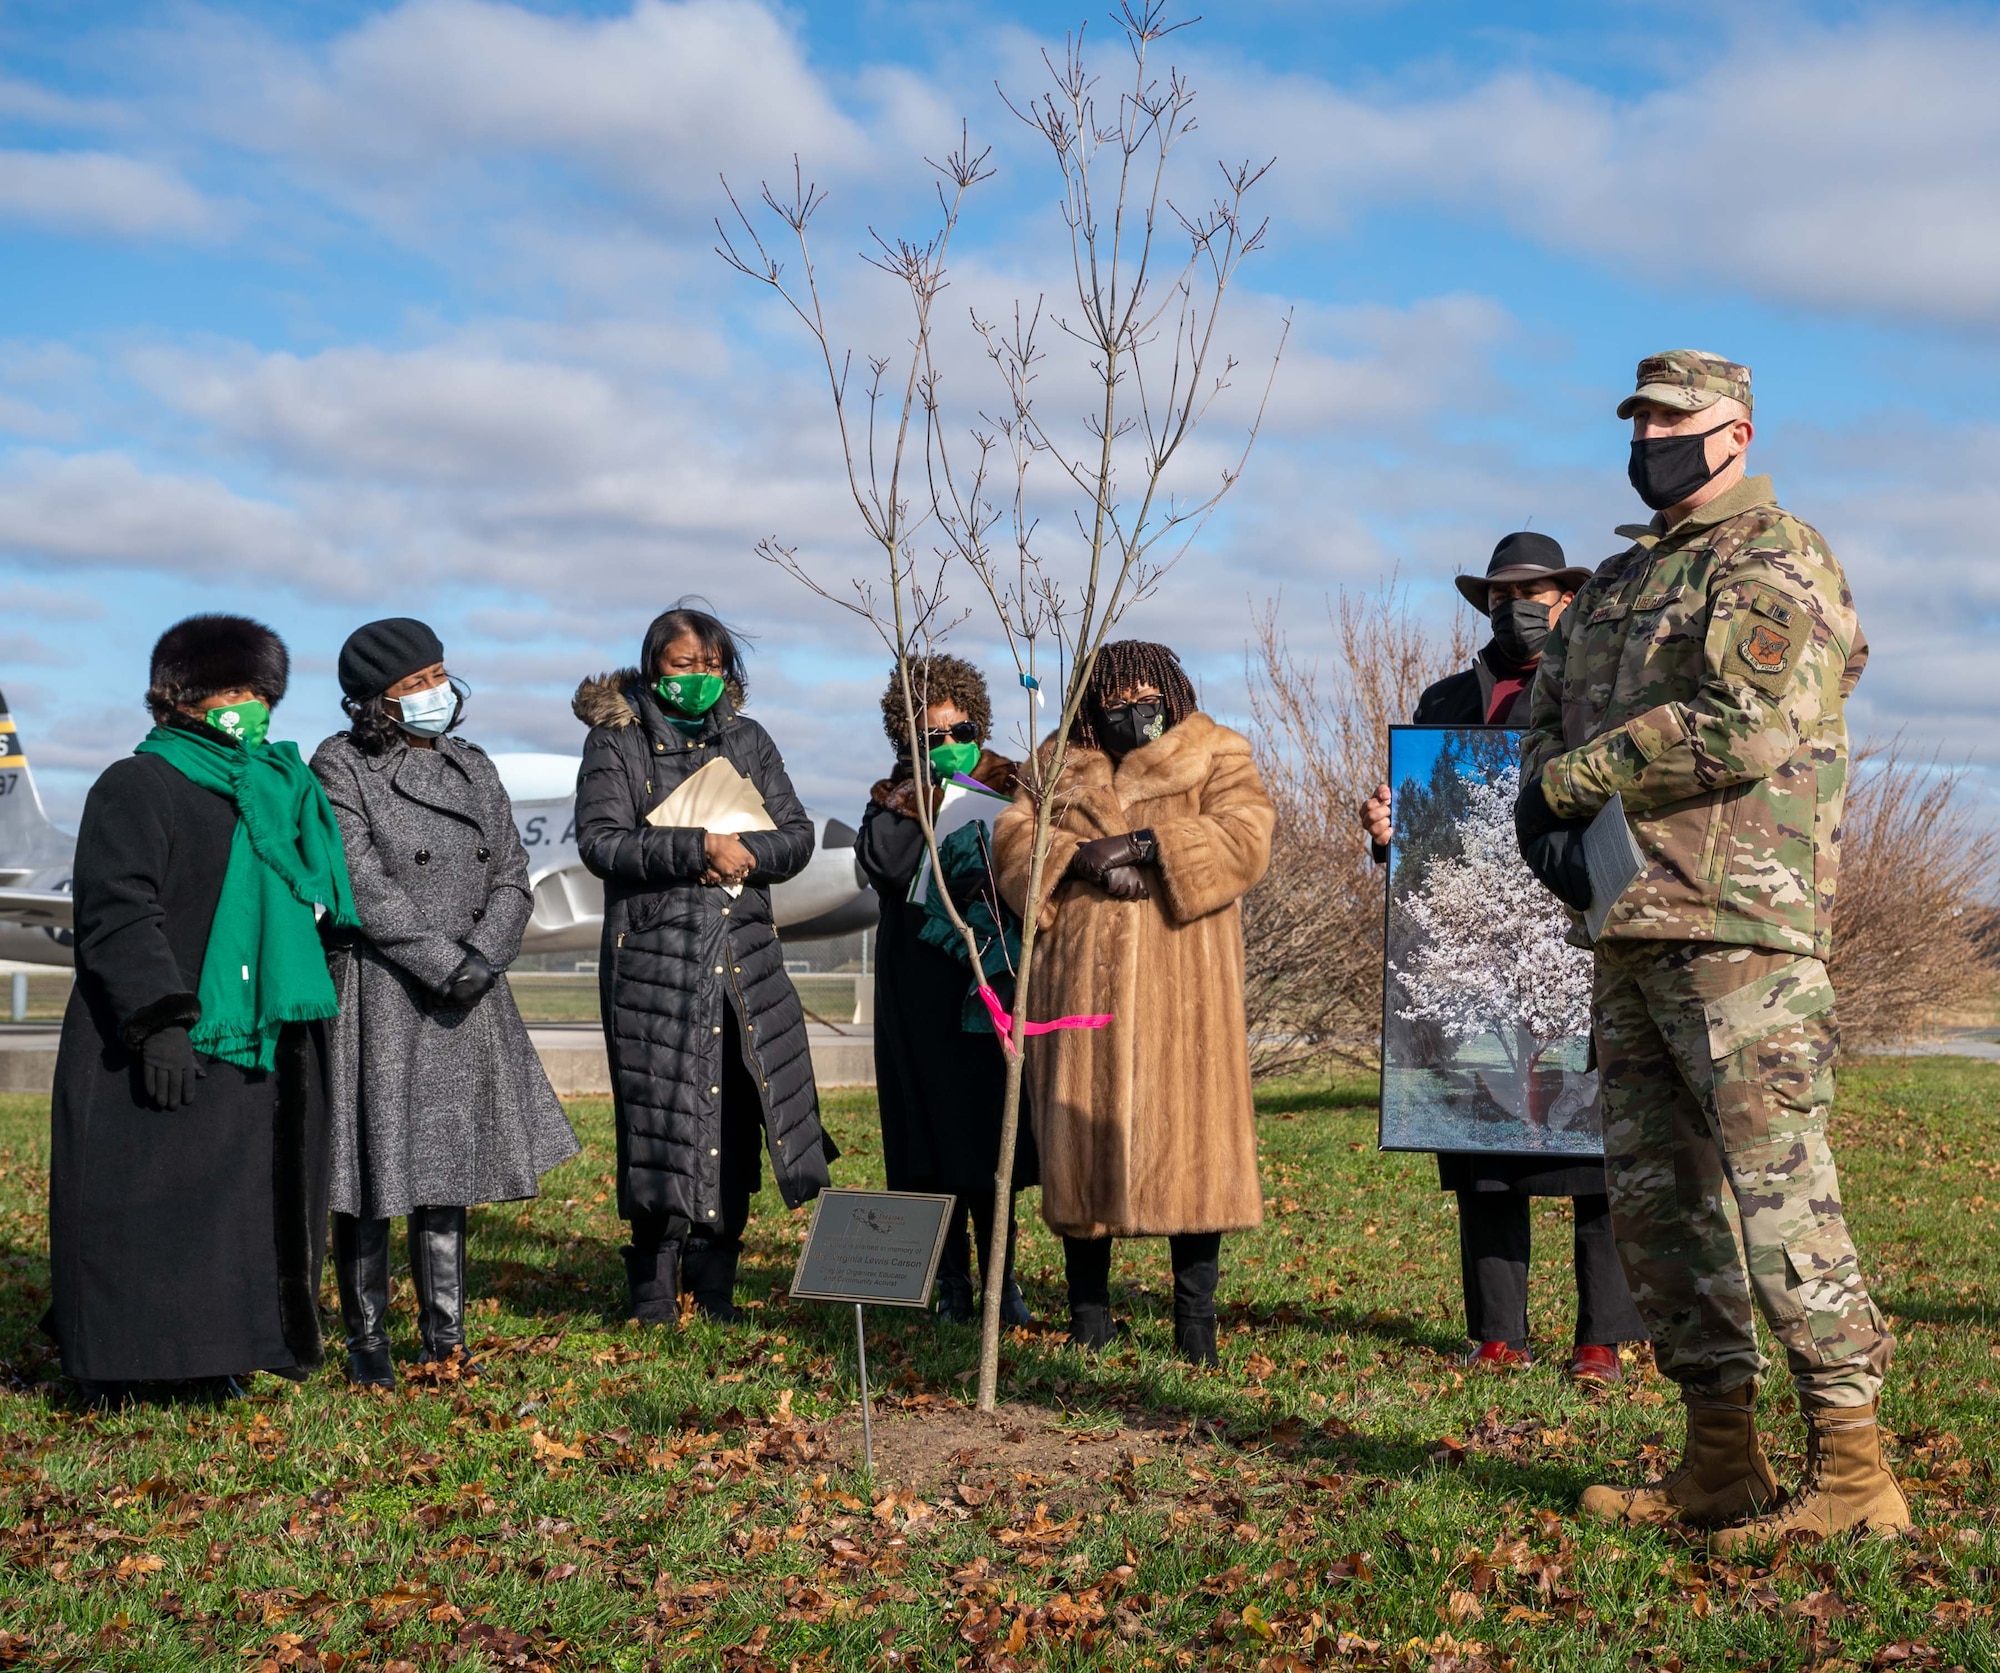 Col. Brian Eddy, Air Force Mortuary Affairs Operations commander, speaks at a tree dedication ceremony Dec. 17, 2020 at the Air Mobility Command at Dover Air Force Base, Delaware. The ceremony celebrated the life of Carson, a prominent Delaware educator who passed away Sept. 3, 2019. Carson’s husband was a civilian mortician for the United States Air Force for whom the Air Force Mortuary Affairs Operations facility is named after - The Charles C. Carson Center for Mortuary Affairs. (U.S. Air Force photo by Airman 1st Class Faith Schaefer)